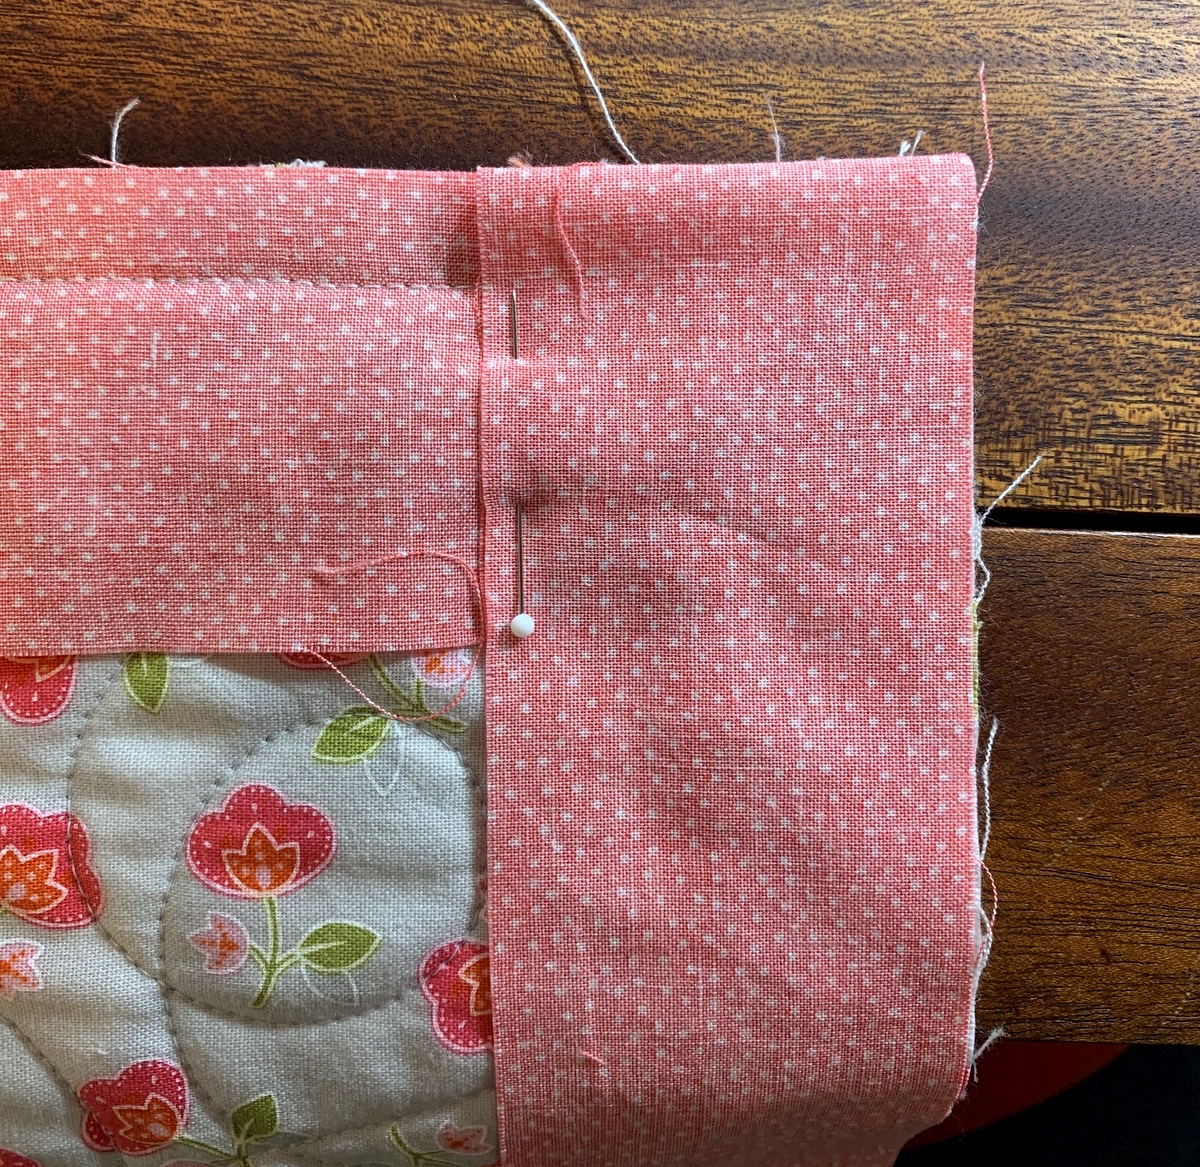 Stitching With 2 Strings: Tutorial: Satin Binding on a Baby